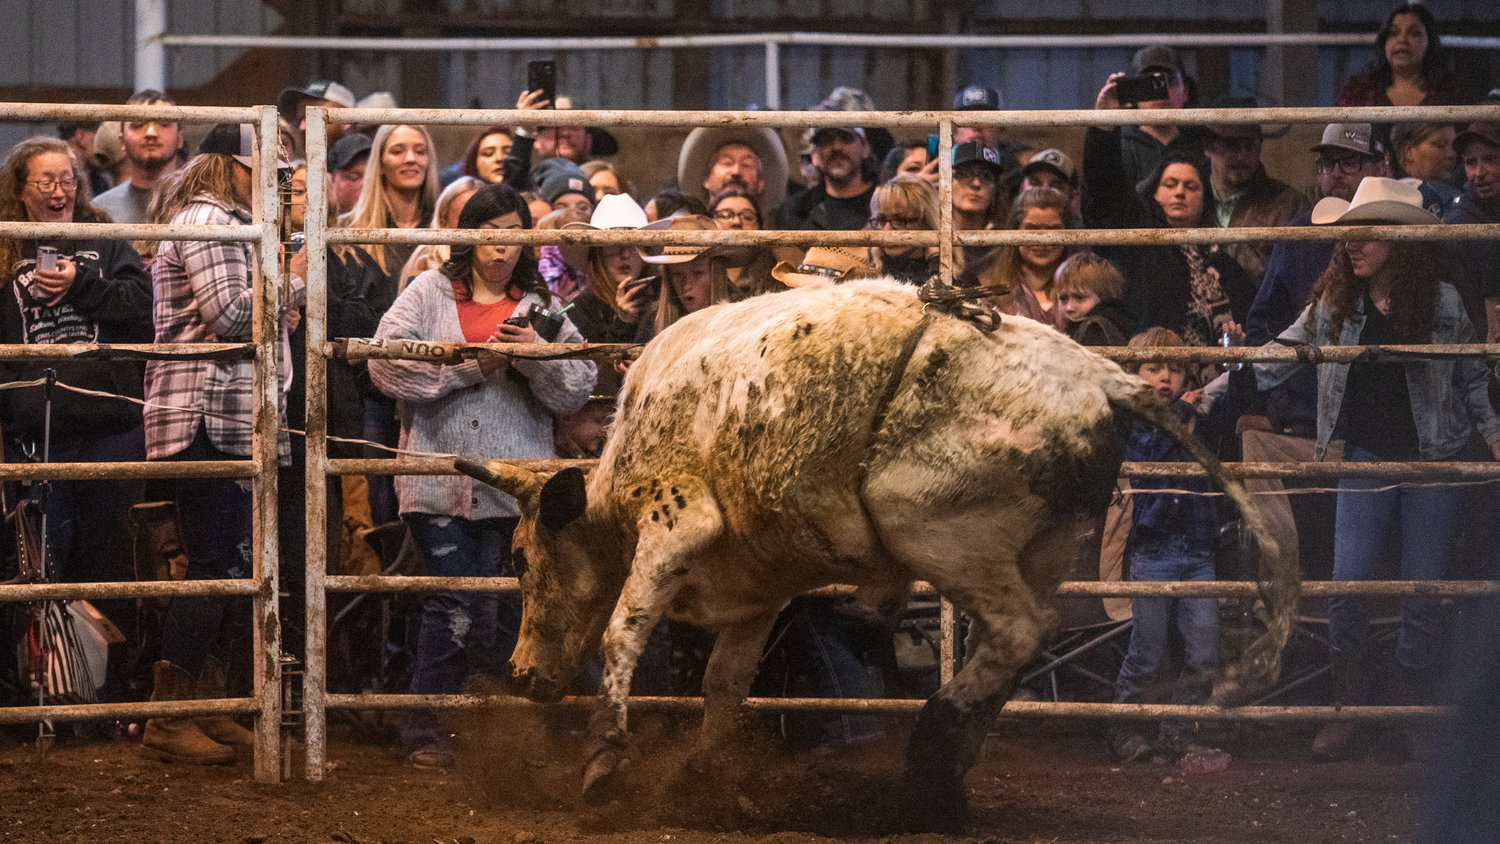 Crowds react to a bucking bull near a fence at a Lazy HK Bar Rodeo Winter Series event Saturday in Silver Creek.